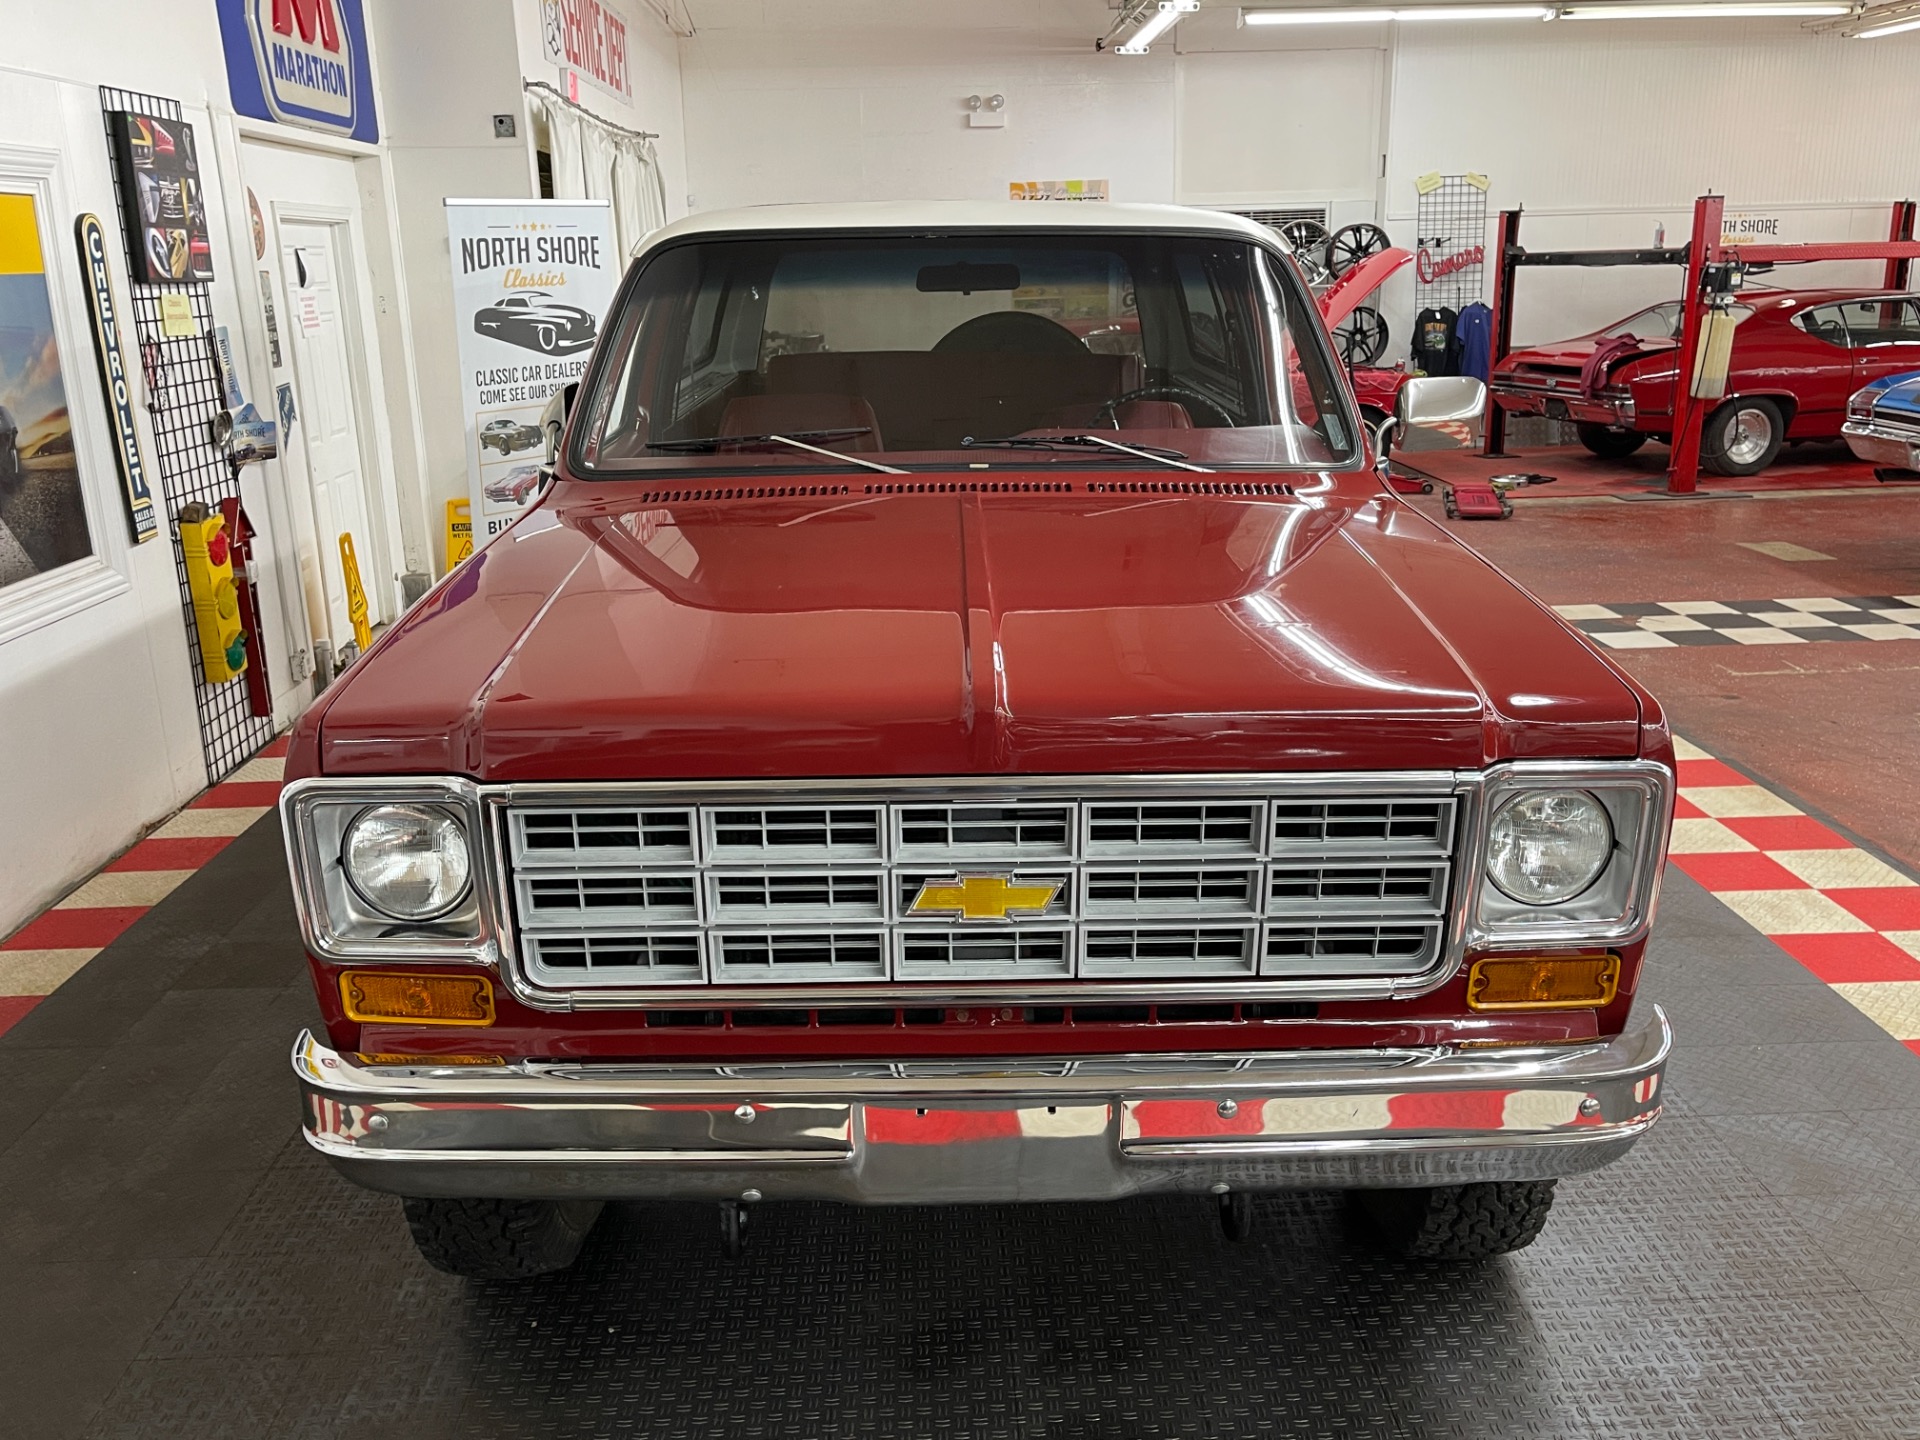 Used 1976 Chevrolet Blazer - K5 4x4 - NEW PAINT - SUPER CLEAN BODY AND FLOORS - SEE VIDEO - | Mundelein, IL